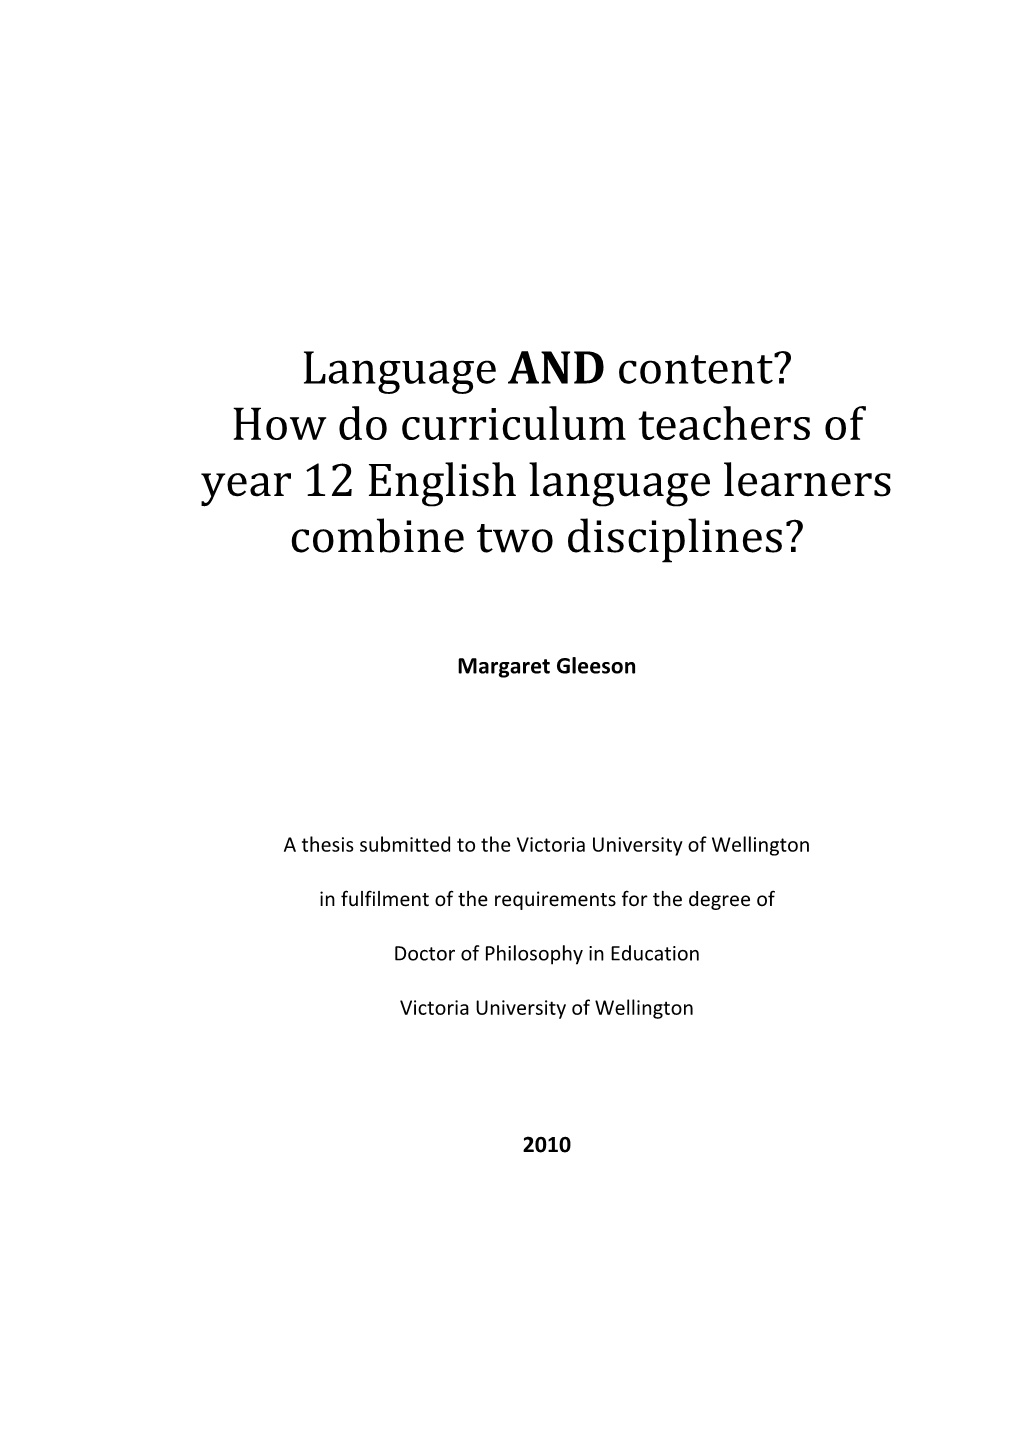 How Do Curriculum Teachers of Year 12 English Language Learners Combine Two Disciplines?